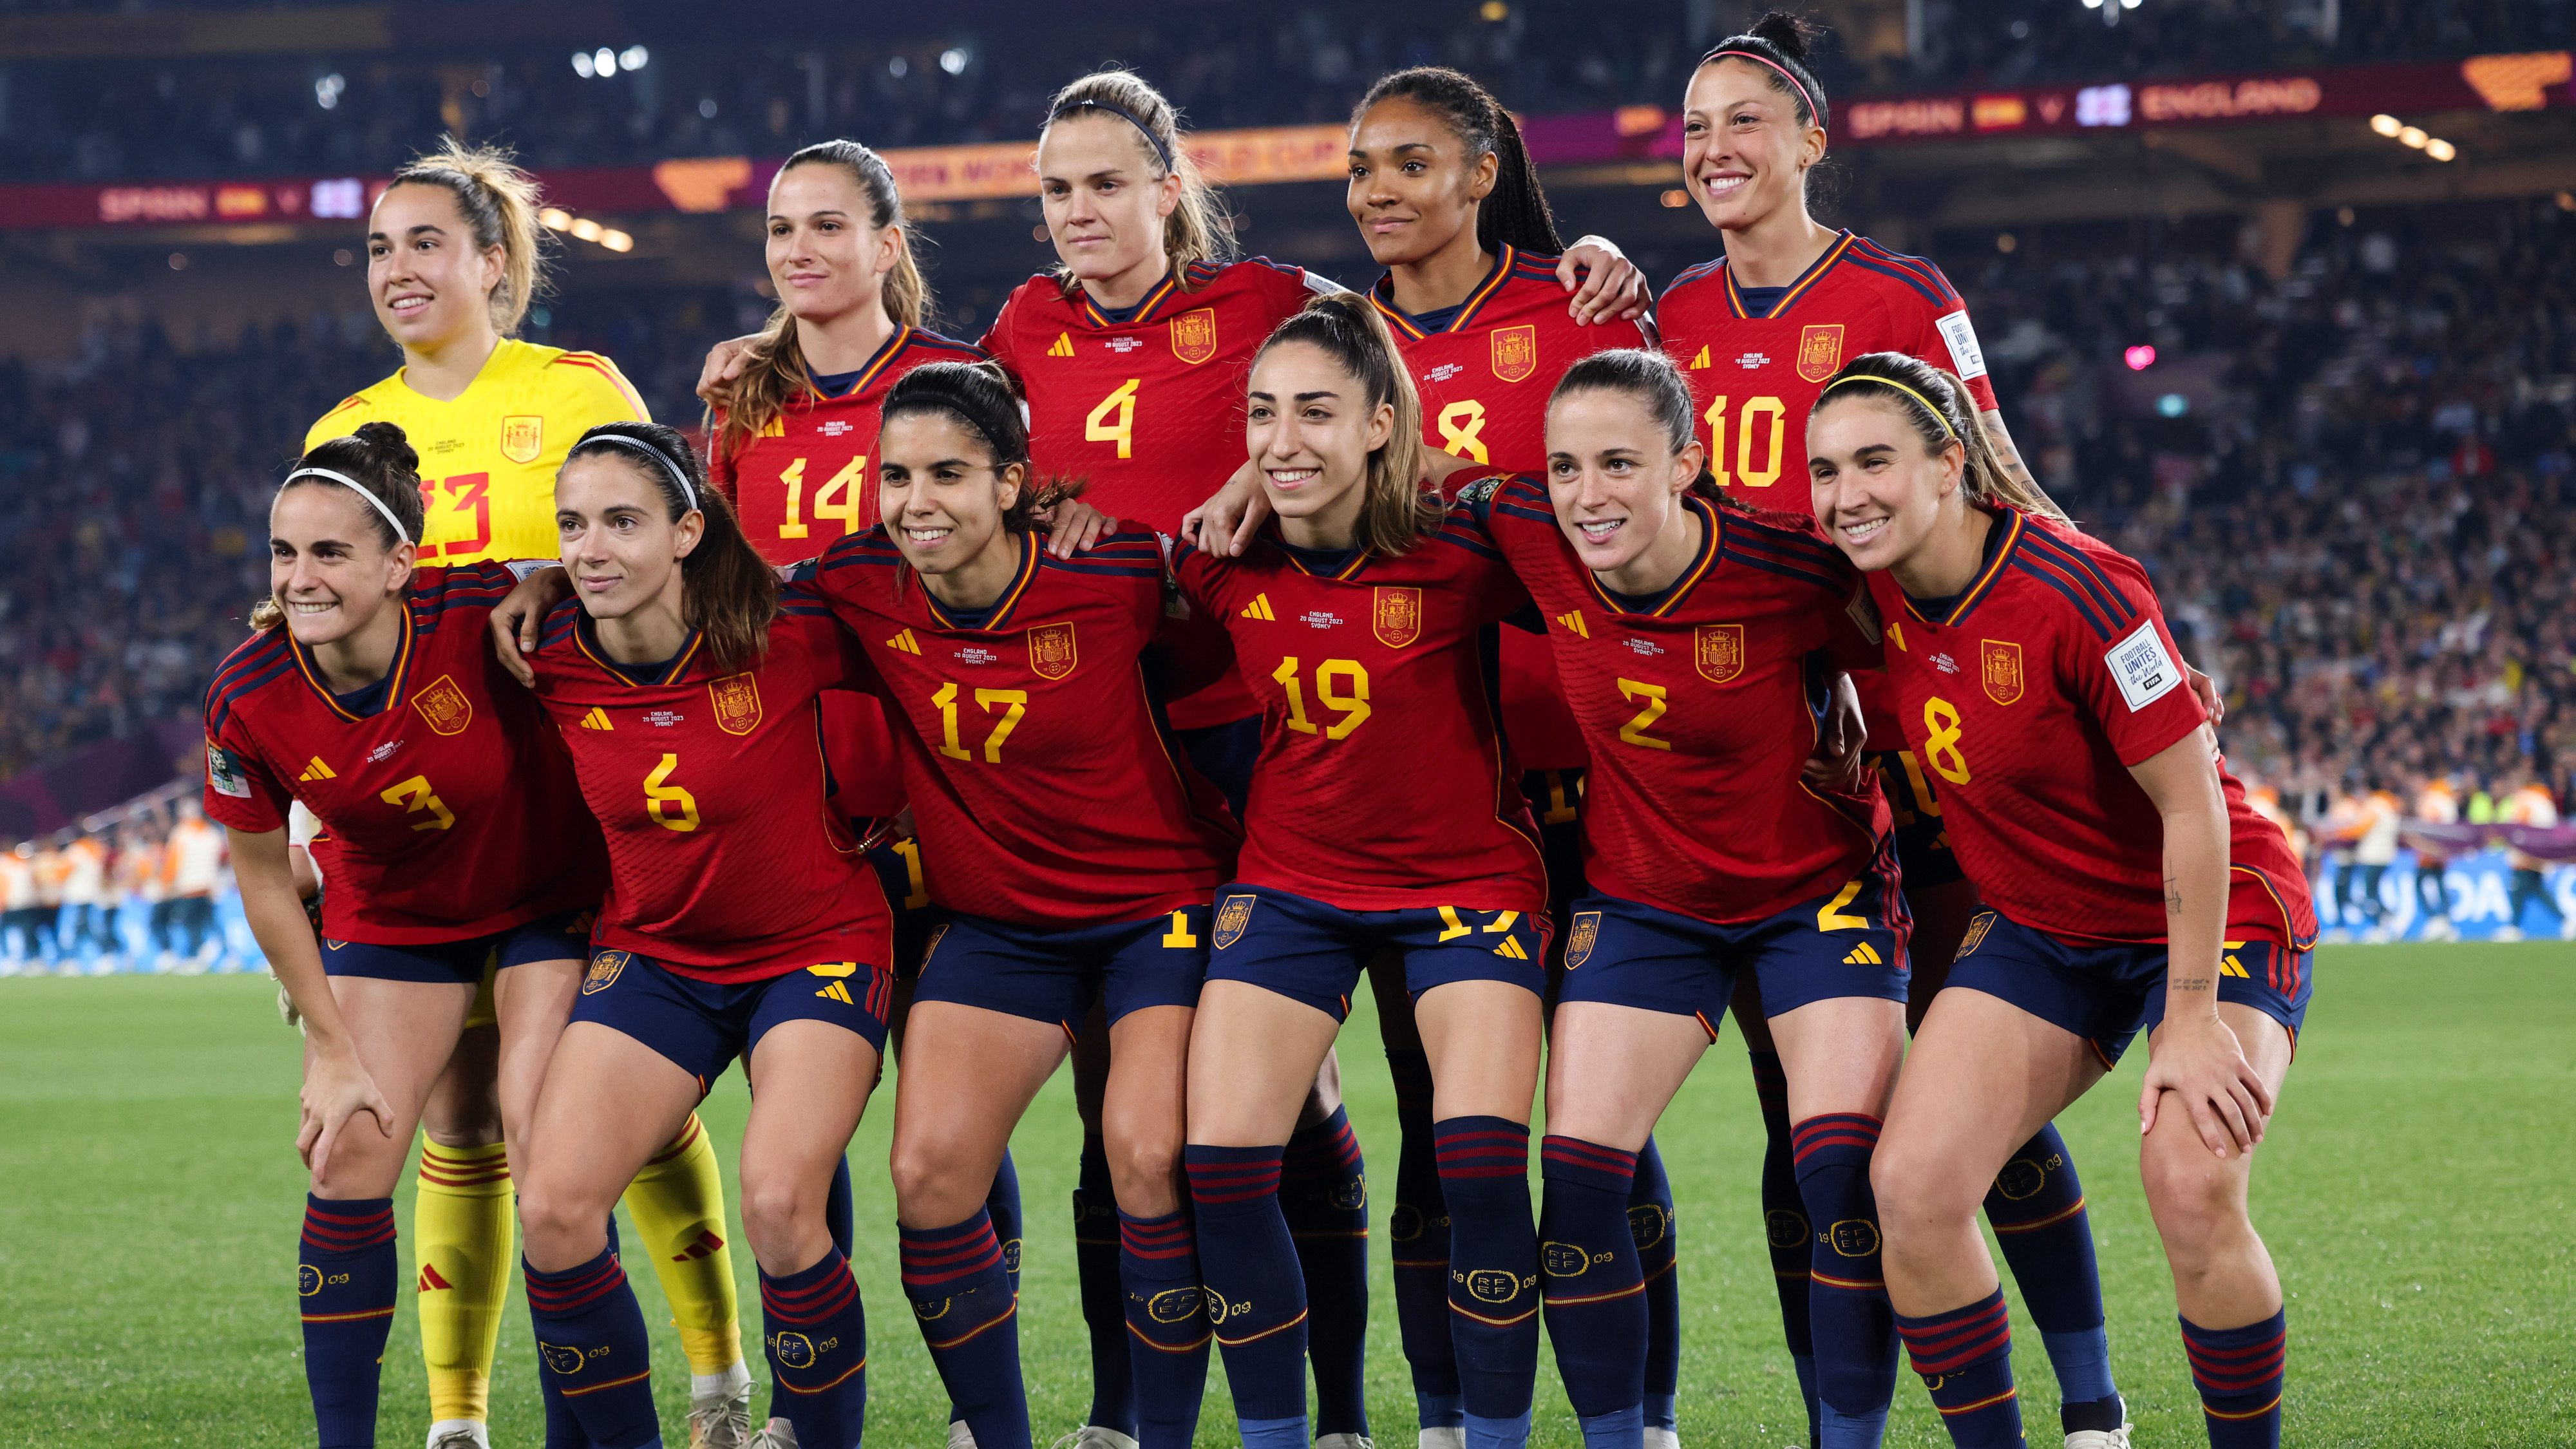 Spain womens soccer team refuses to play until Luis Rubiales resigns image pic